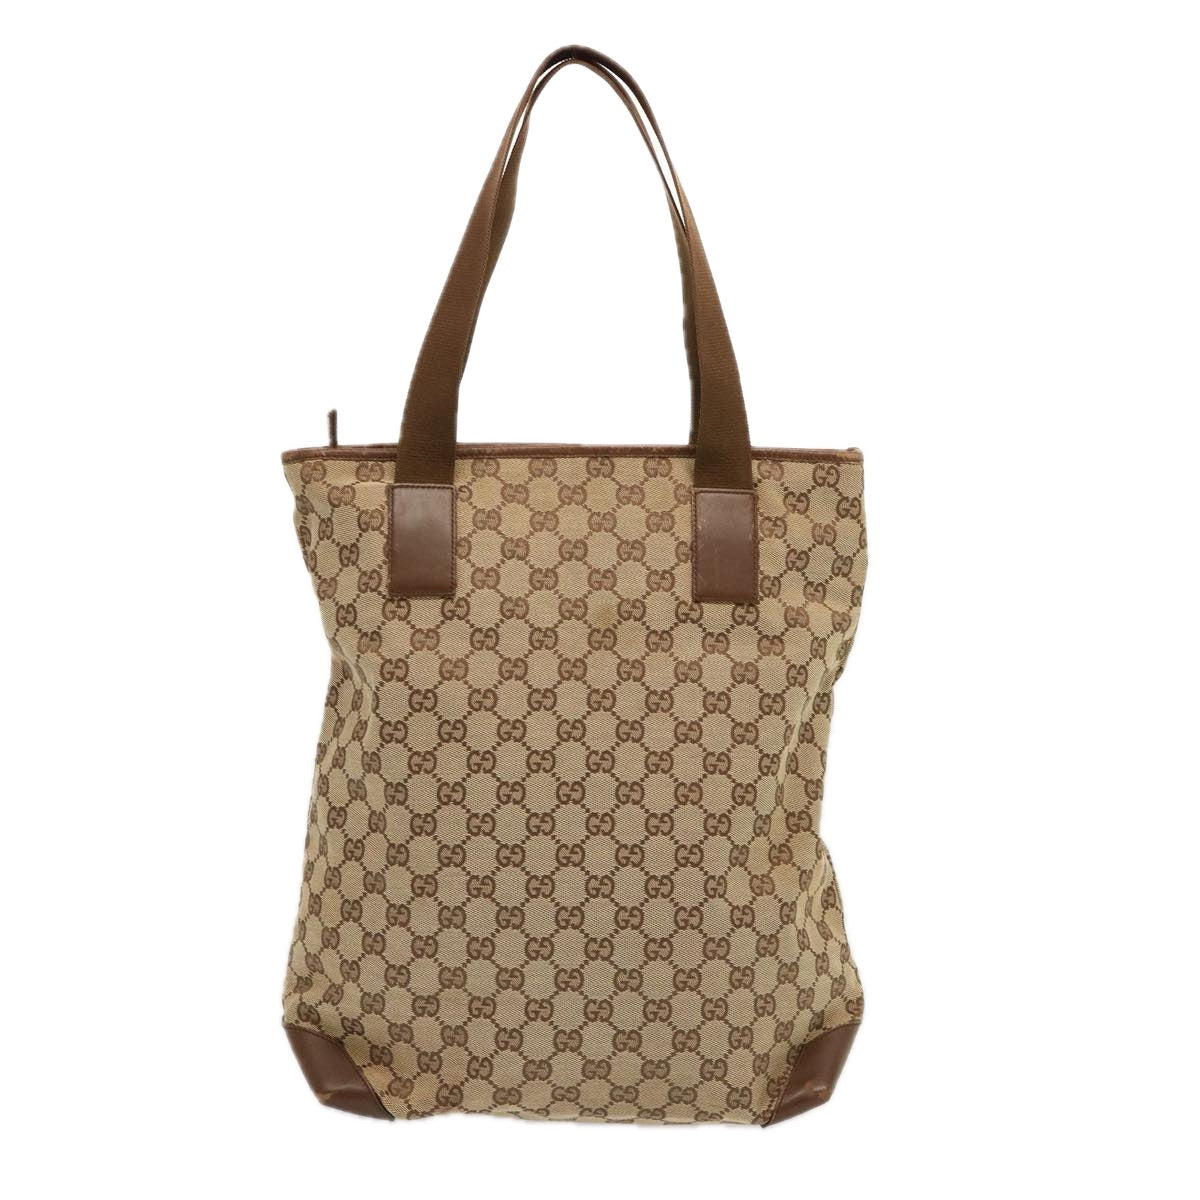 GUCCI GG Canvas Tote Bag Beige Brown 019 0401 Auth ep3771 - 0